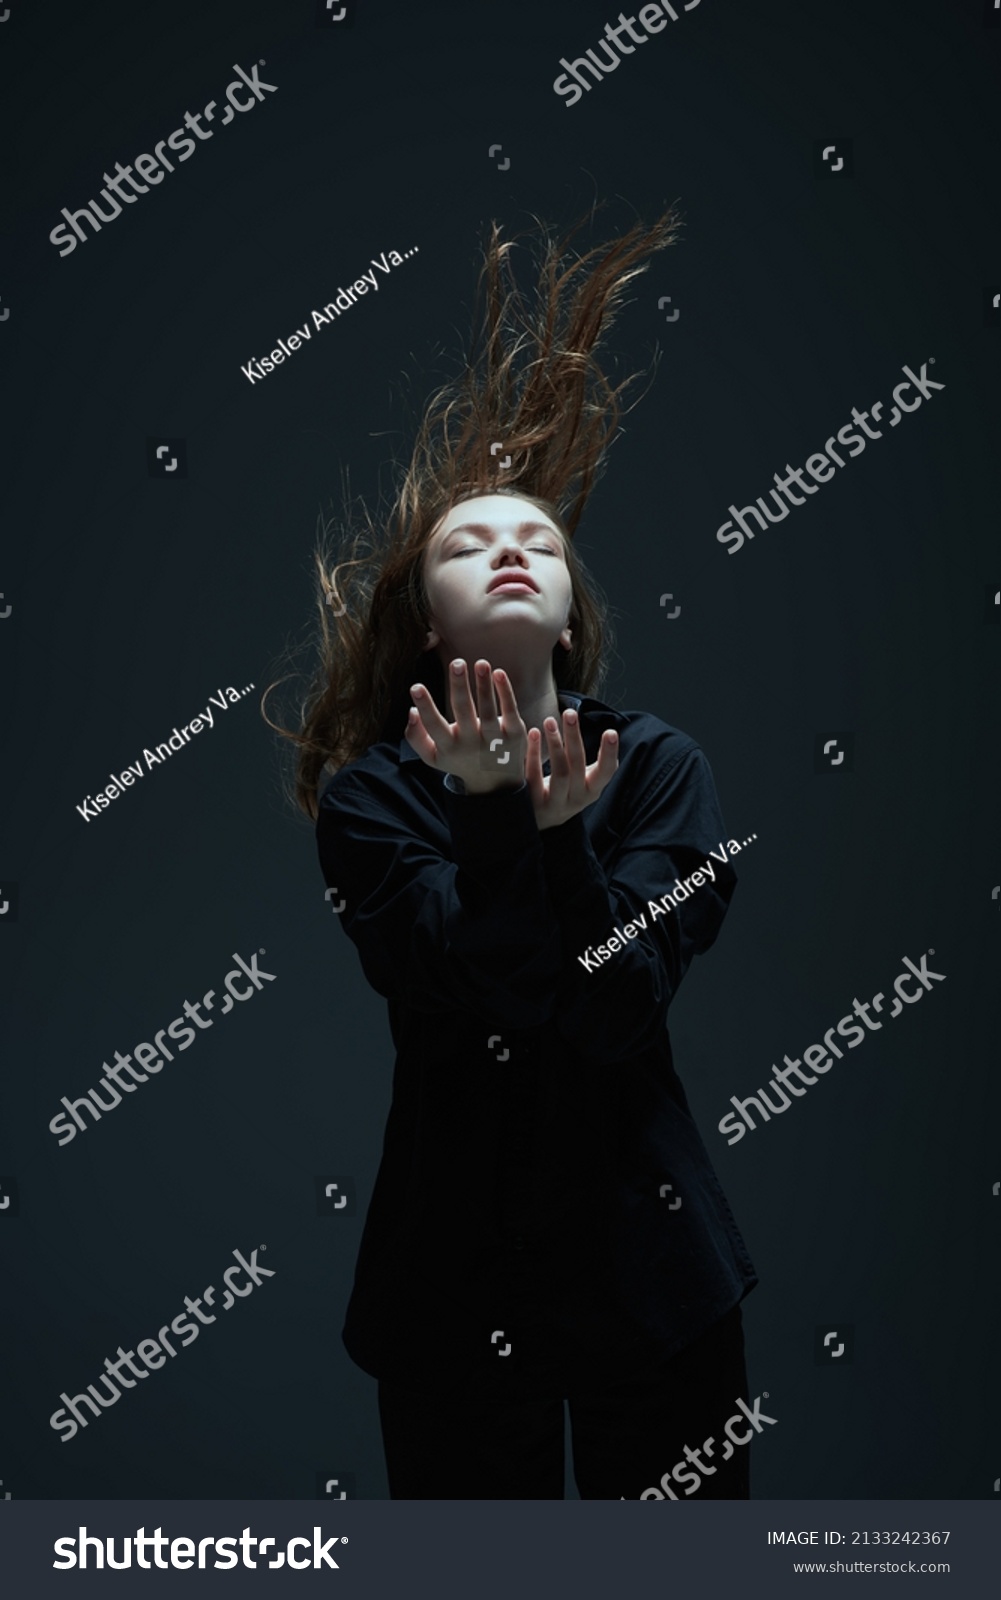 Art portrait of a beautiful young girl with long flying hair and closed eyes. The inner world of a human, emotions. Thoughtfulness, meditation. Studio portrait on a dark background. #2133242367